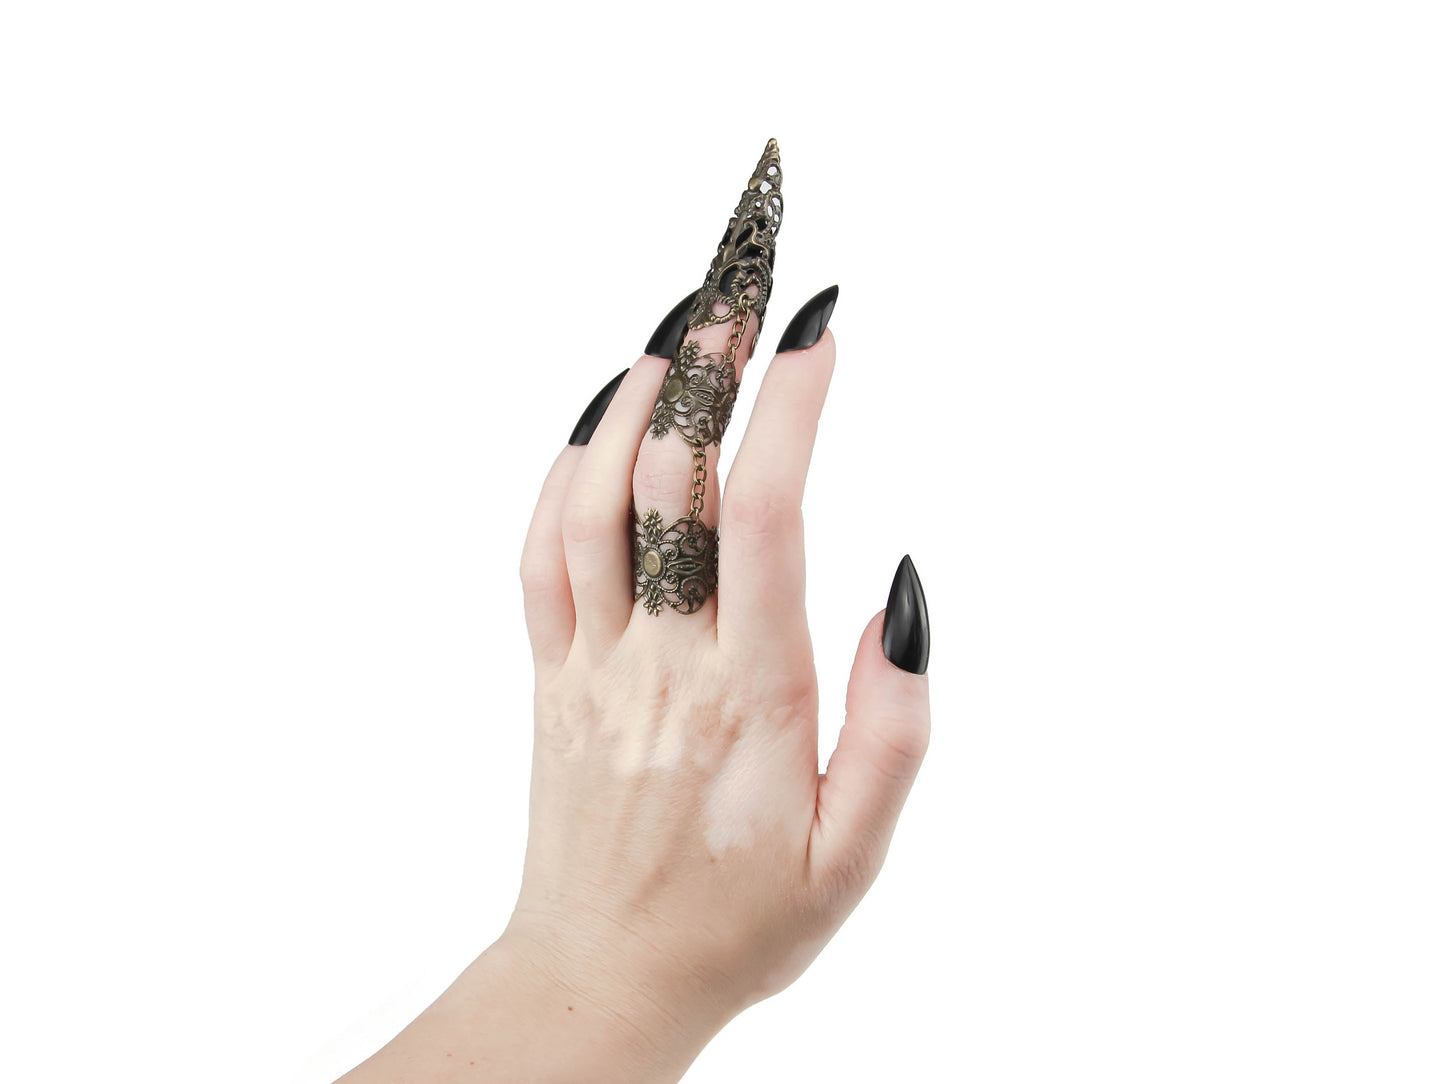 A hand elegantly displays Myril Jewels' full finger double ring in bronze, extending into a long, ornate claw over the nail, exuding a luxurious golden shimmer. This distinctive piece exemplifies neo-goth craftsmanship, ideal for those drawn to the dark-avantgarde and gothic-chic aesthetic. It's a bold statement accessory, perfect for Halloween, enhancing a minimal goth look, or as a dramatic addition to rave party and festival jewelry collections